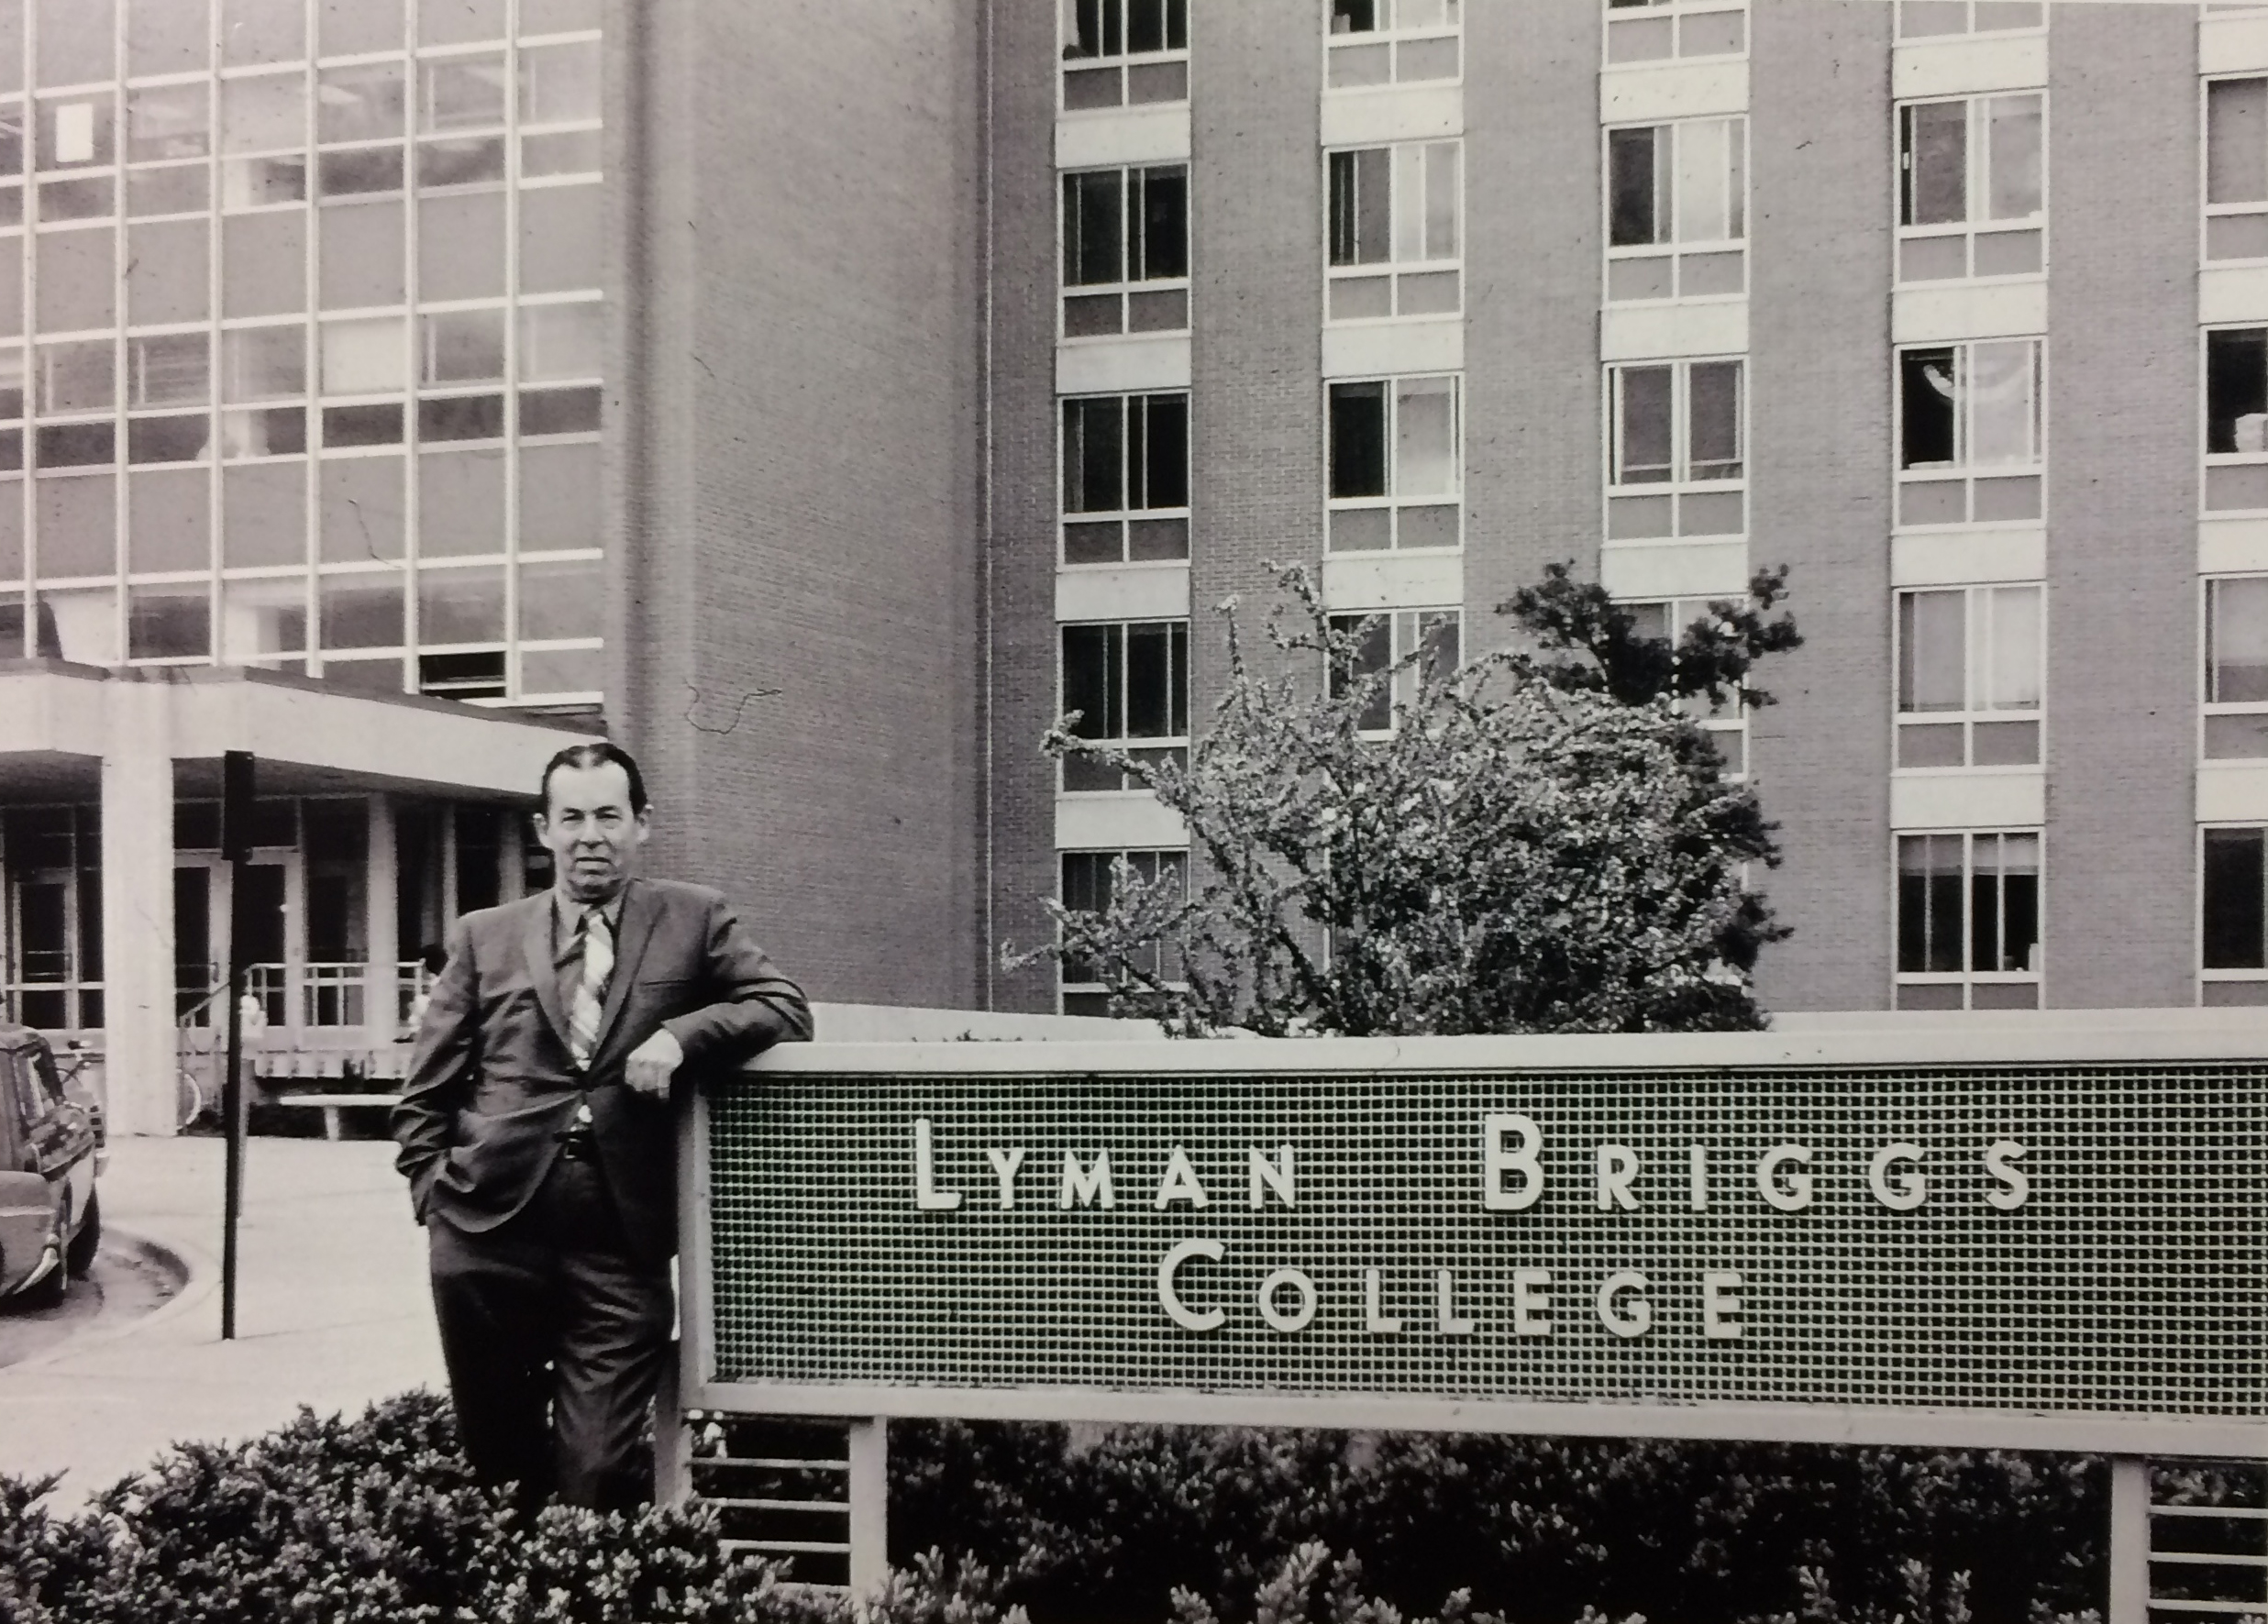 The first dean of Lyman Briggs College, Dr. Frederic B. Dutton, in 1967, by a sign "Lyman Briggs College" at the west entrance of Holmes Hall